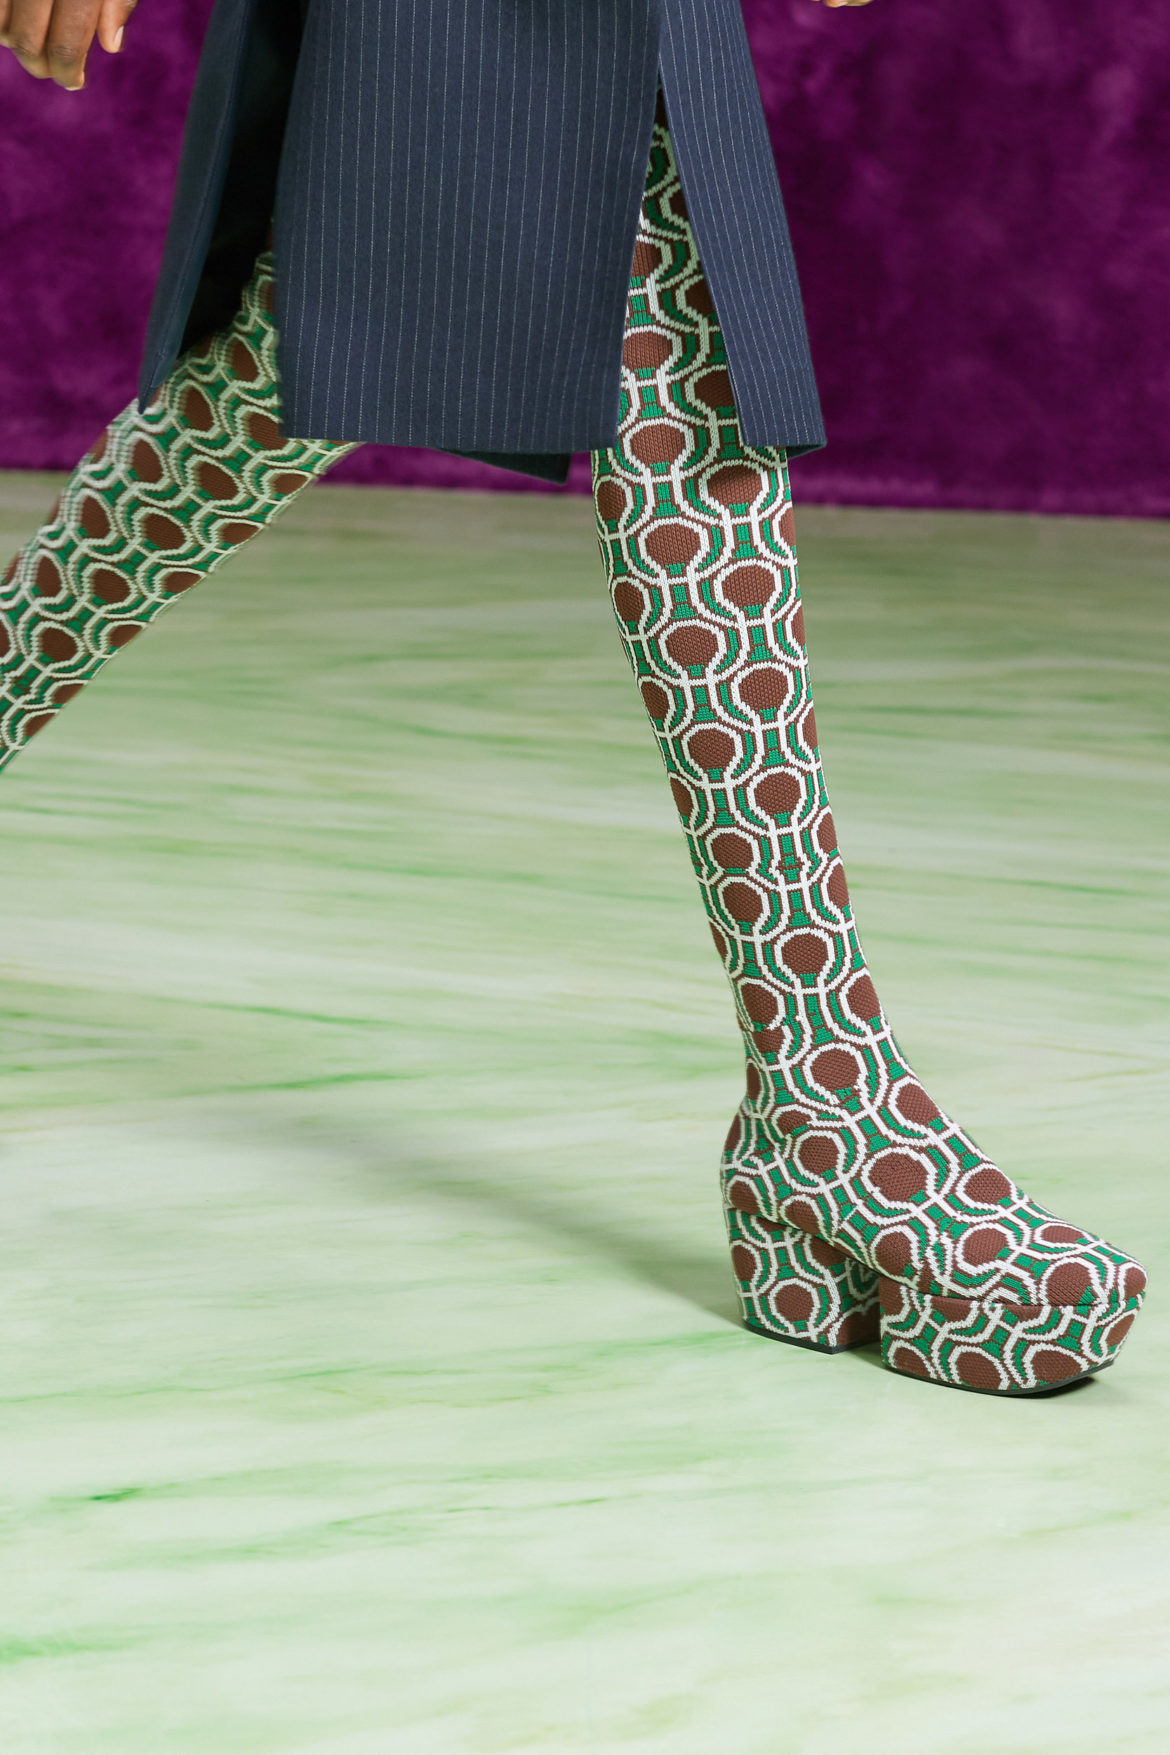 Prada graphic tights boots best details from the runway Fall Winter 2021 fashion week